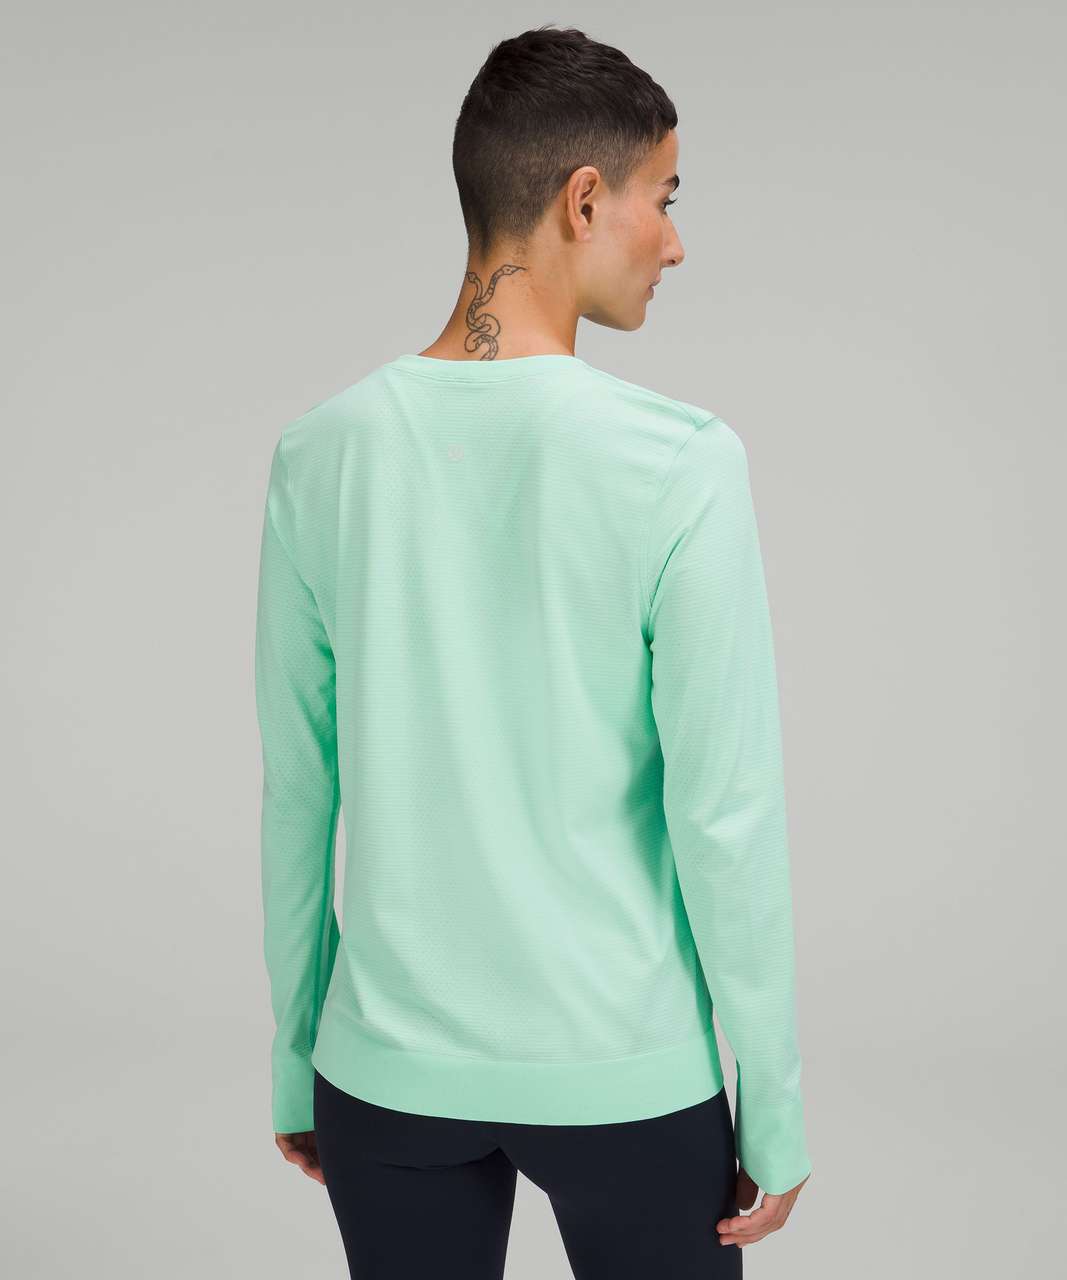 Lululemon Swiftly Relaxed-Fit Long Sleeve Shirt - Wild Mint / Wild Mint